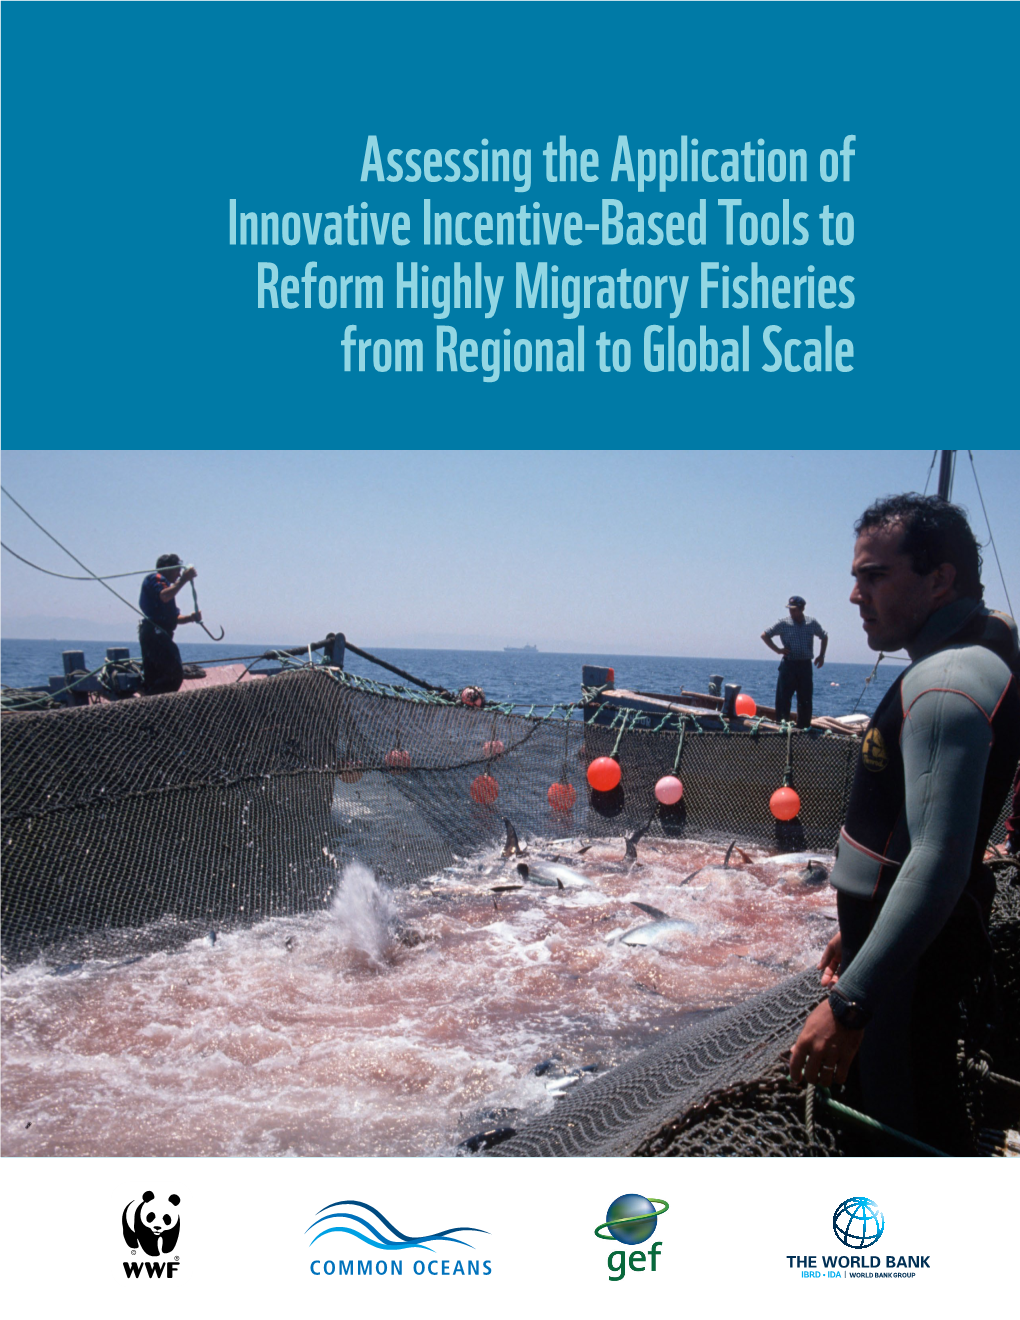 Assessing the Application of Innovative Incentive-Based Tools to Reform Highly Migratory Fisheries from Regional to Global Scale